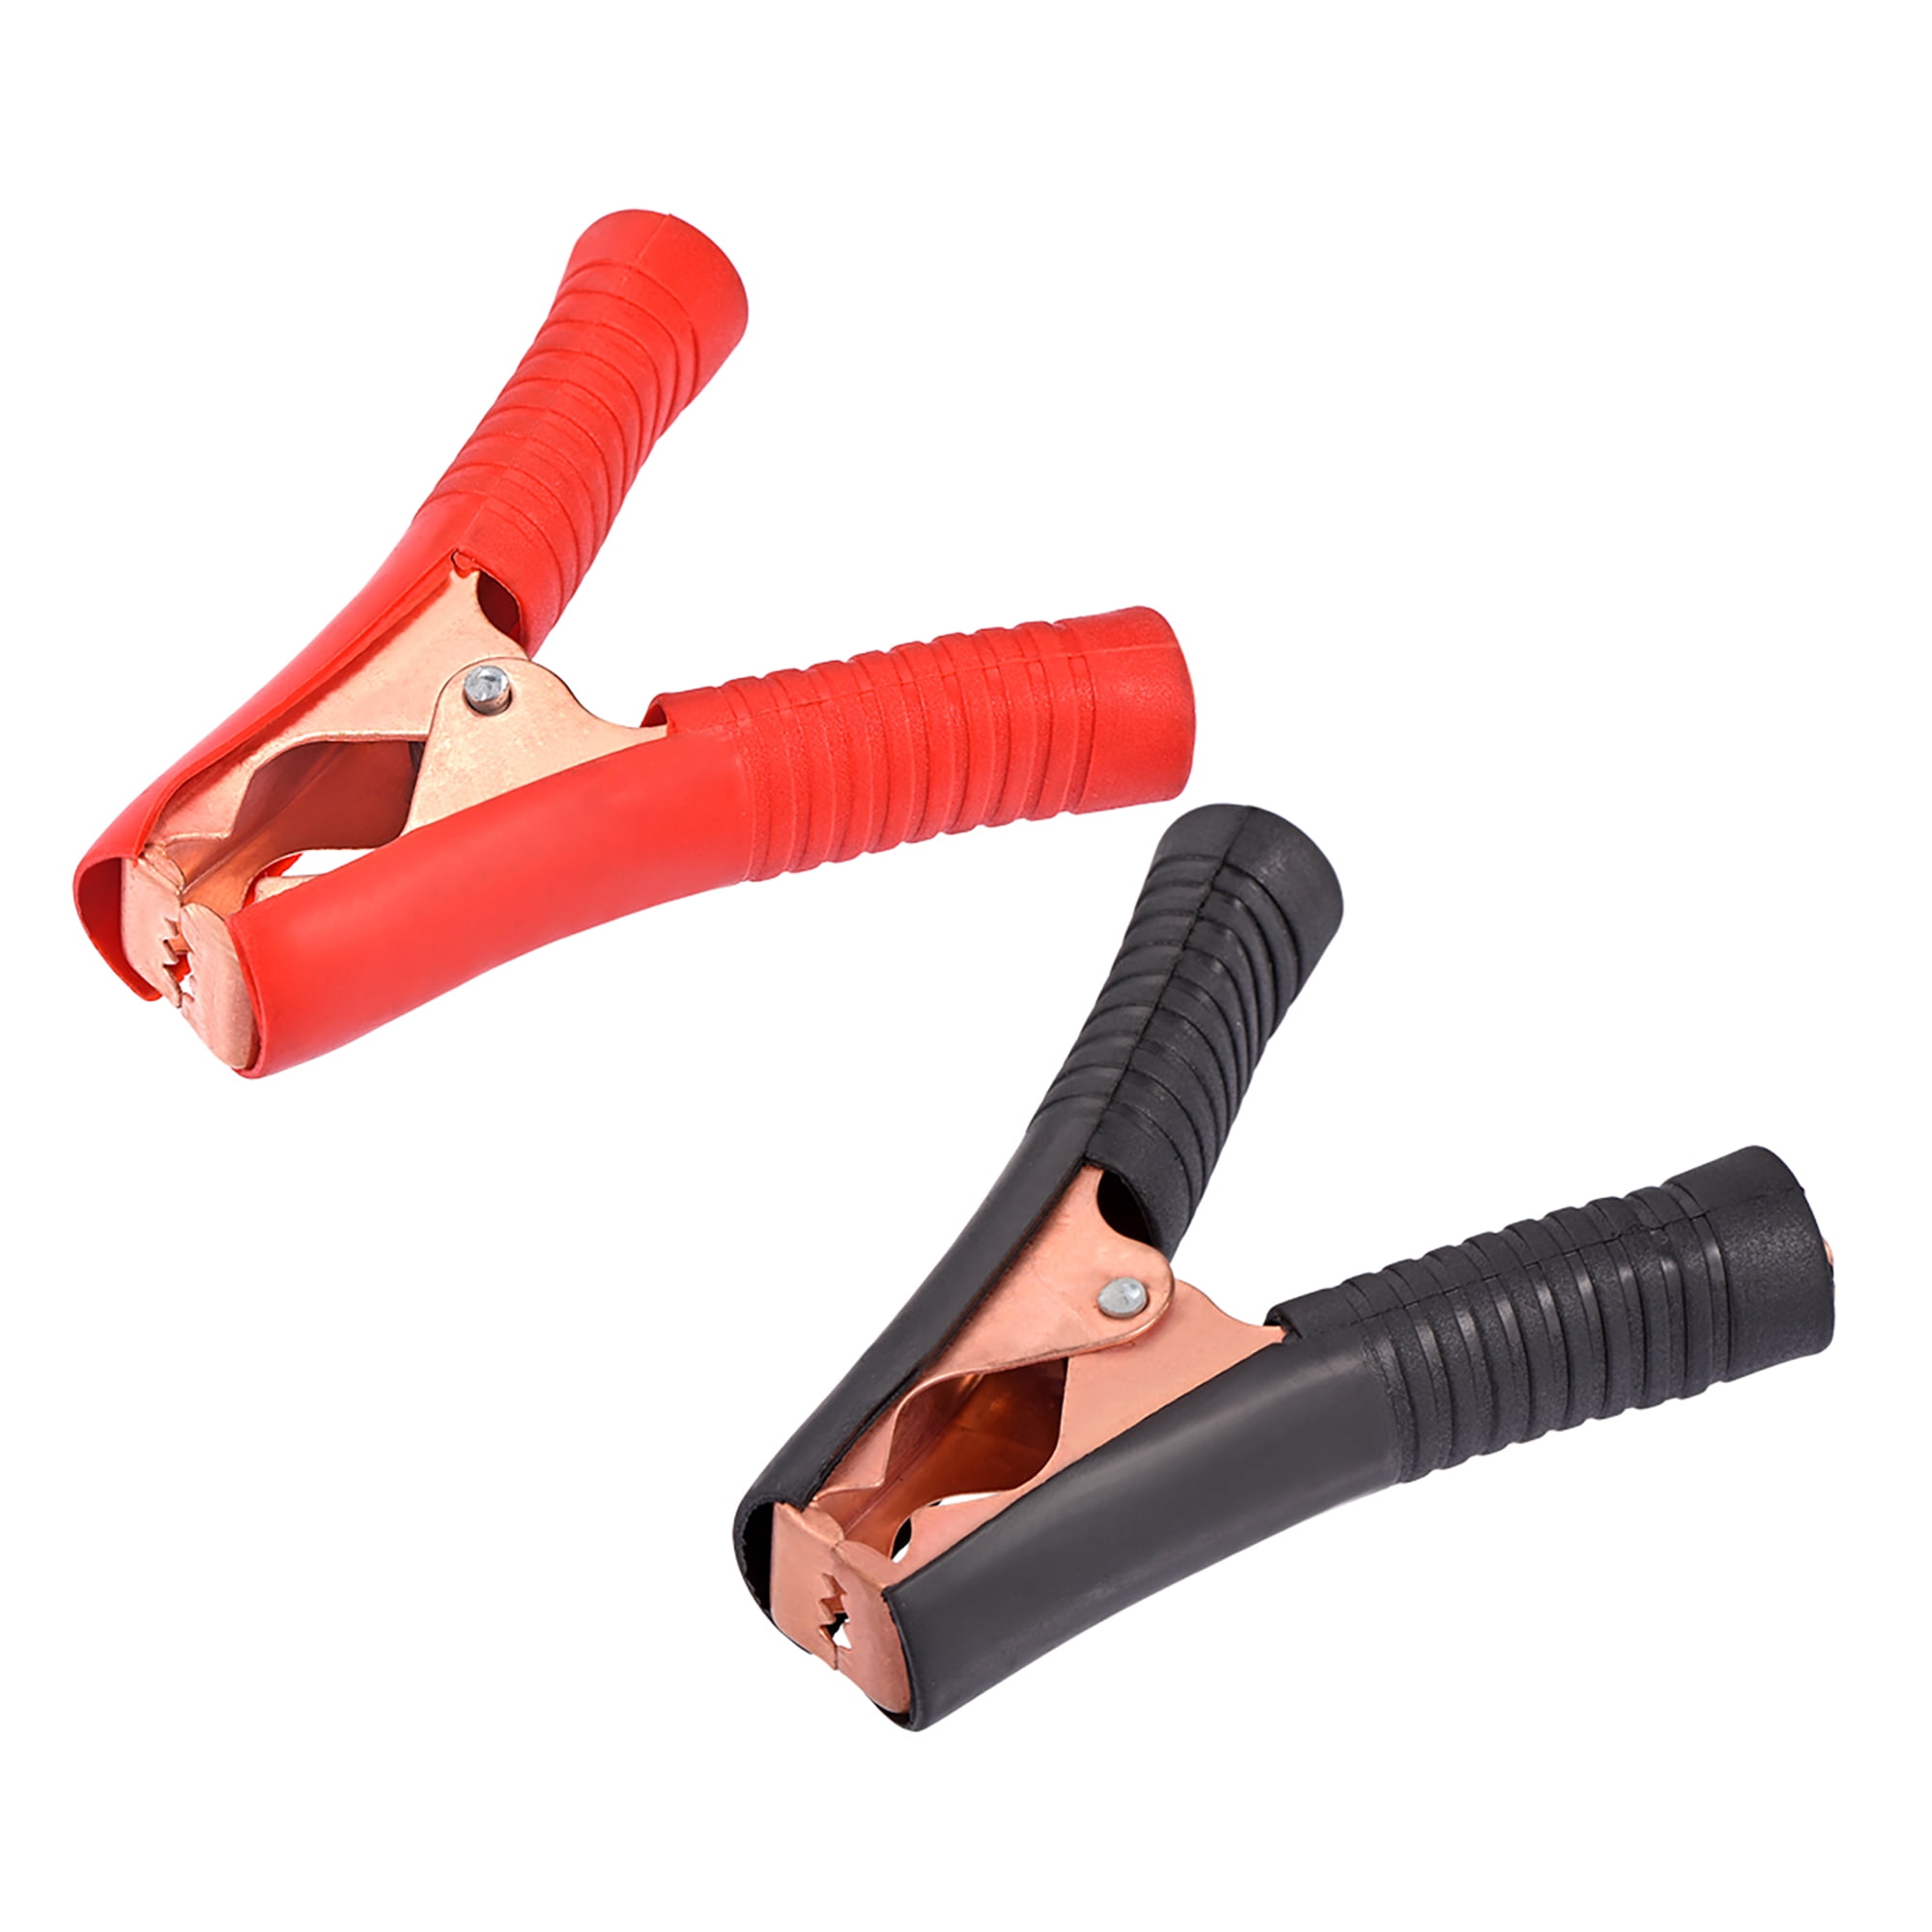 2Pcs Copper Plated Alligator Battery Charger Clips Test Clamps For Jump Starter 